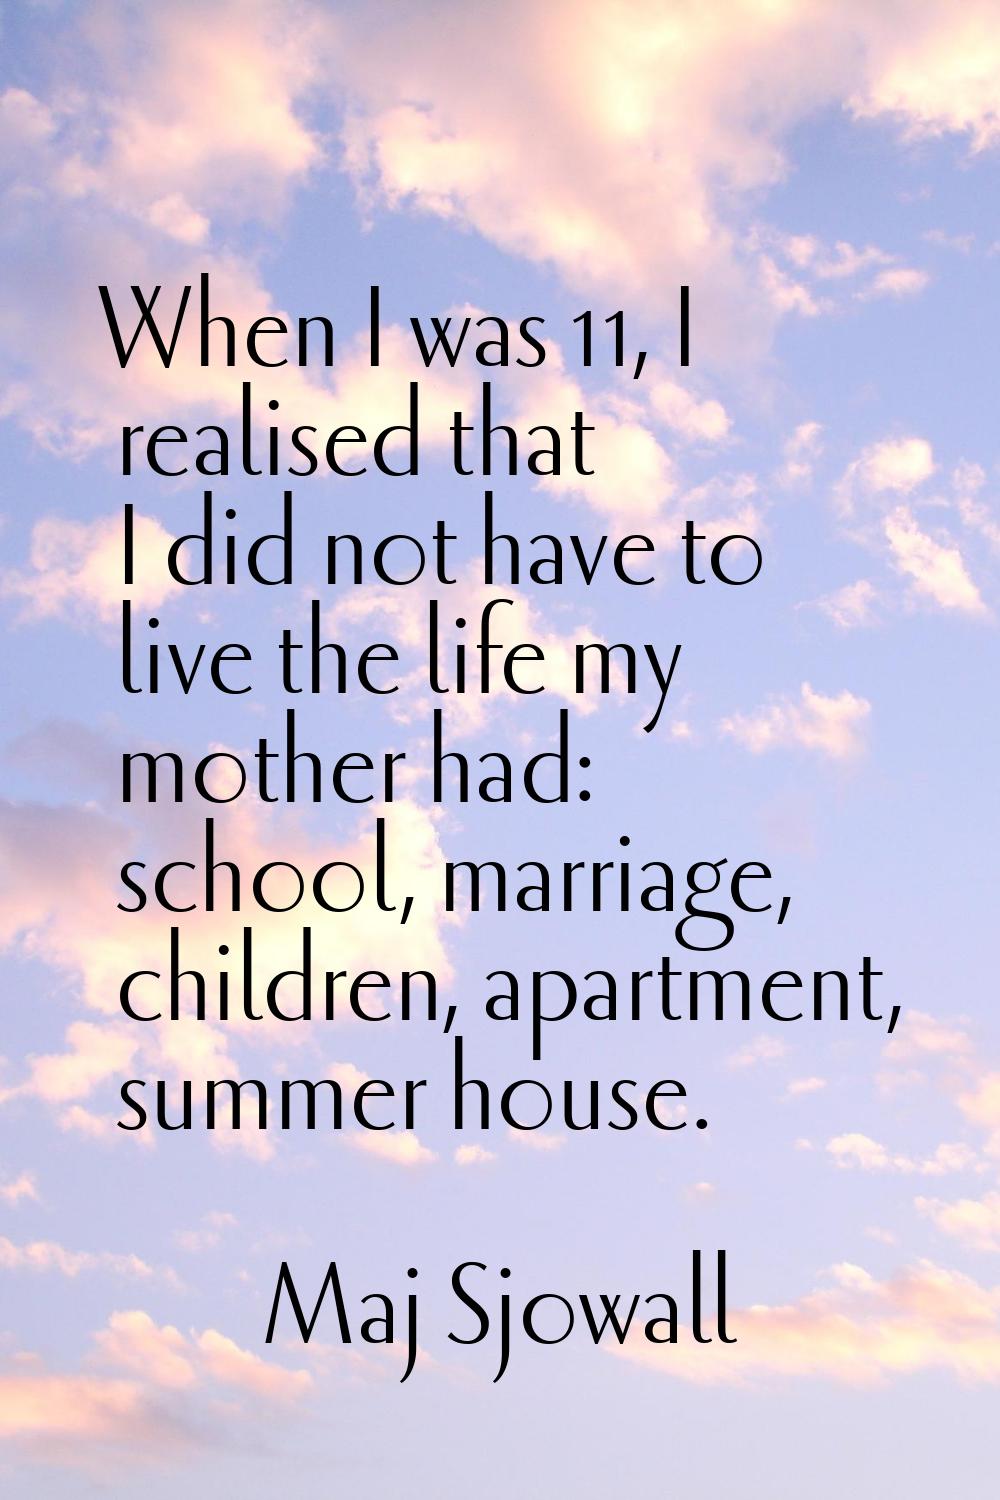 When I was 11, I realised that I did not have to live the life my mother had: school, marriage, chi